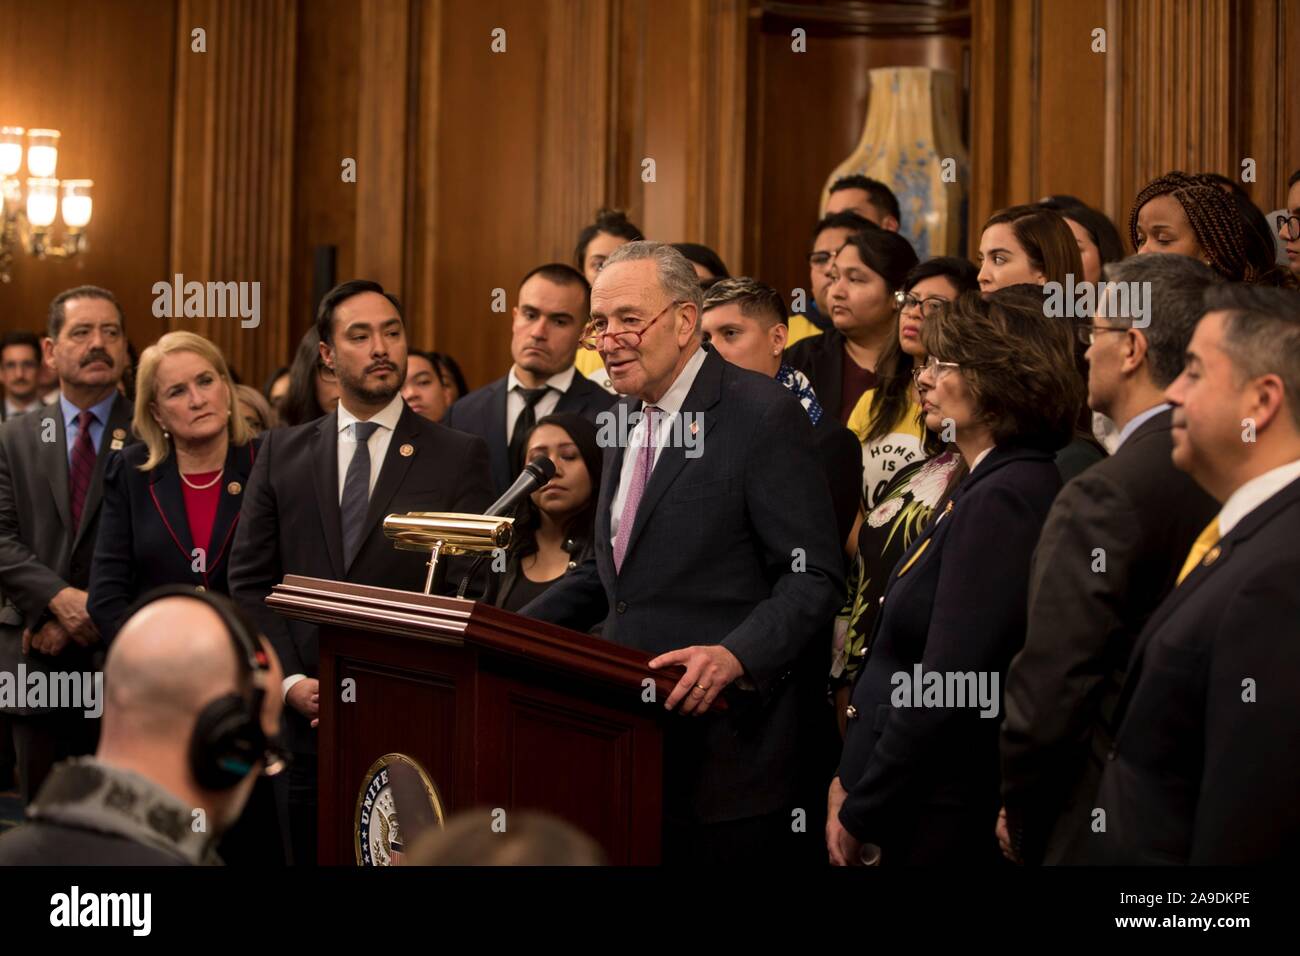 U.S. Senator Chuck Schumer of New York, joined by fellow democrats, calls on the Trump Administration to reverse their termination of DACA during a press conference on Capitol Hill November 12, 2019 in Washington, DC. Members of the Senate and House joined plaintiffs in the DACA case demanded the Republican-controlled Senate to pass the Dream and Promise Act to allow children of undocumented migrants to stay in the United States. Stock Photo